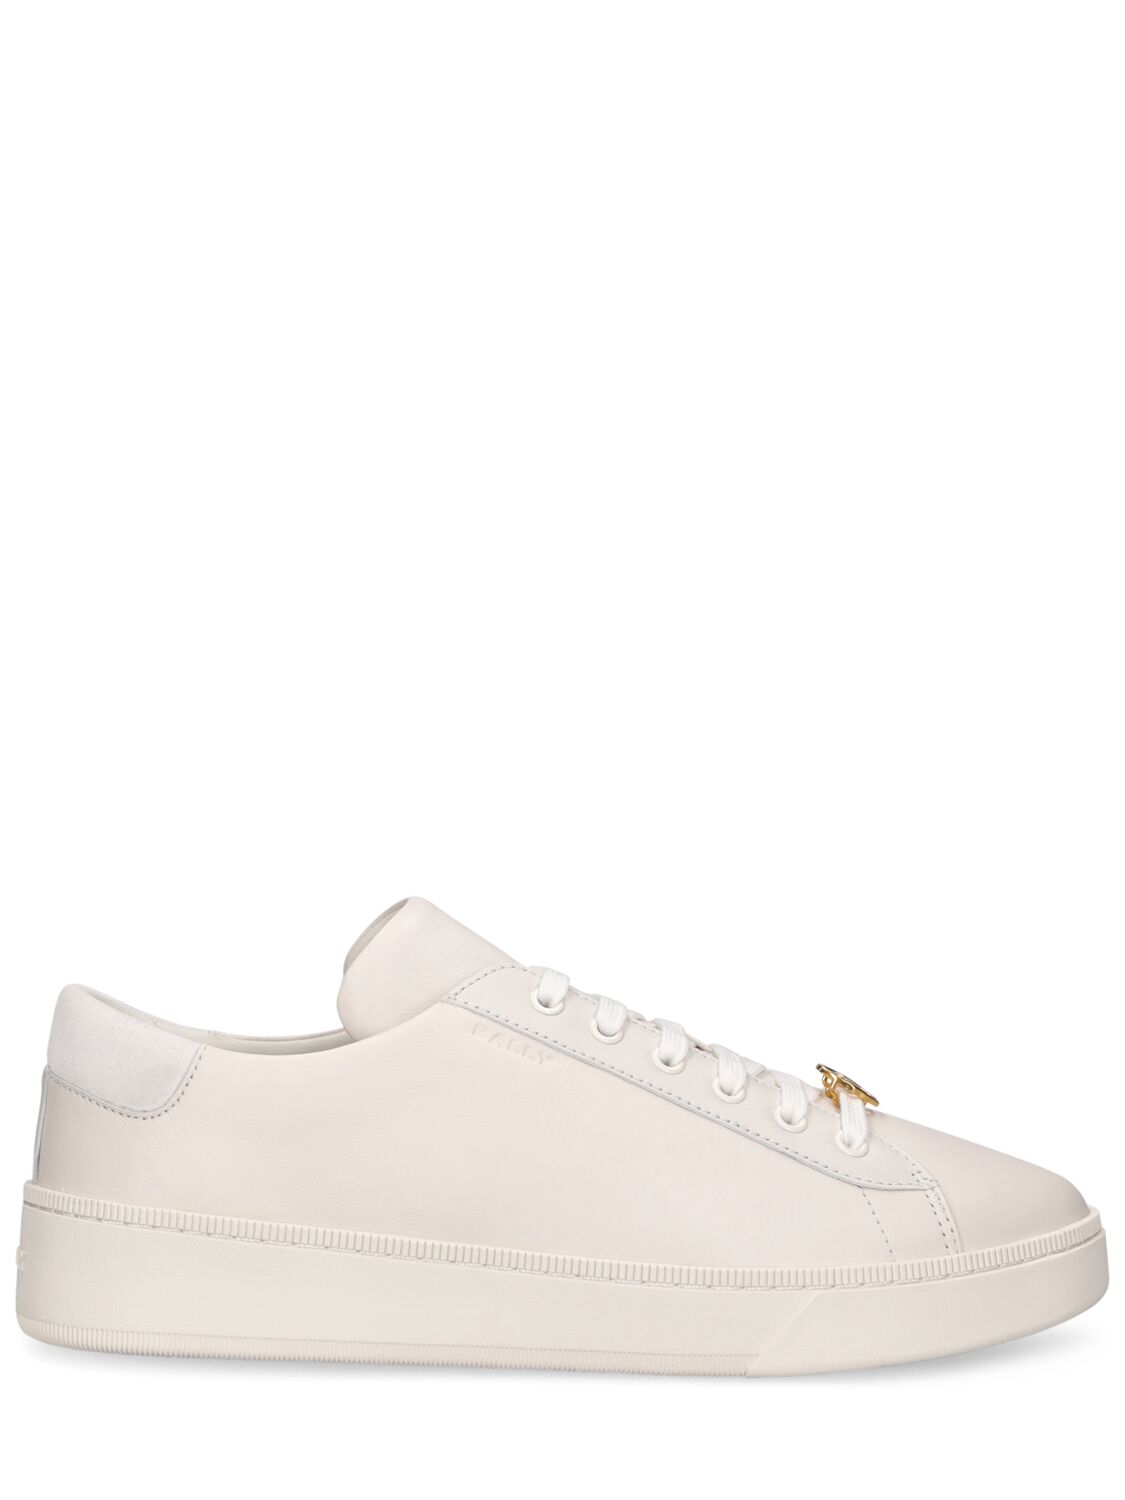 Bally Ryver Leather Sneakers In White